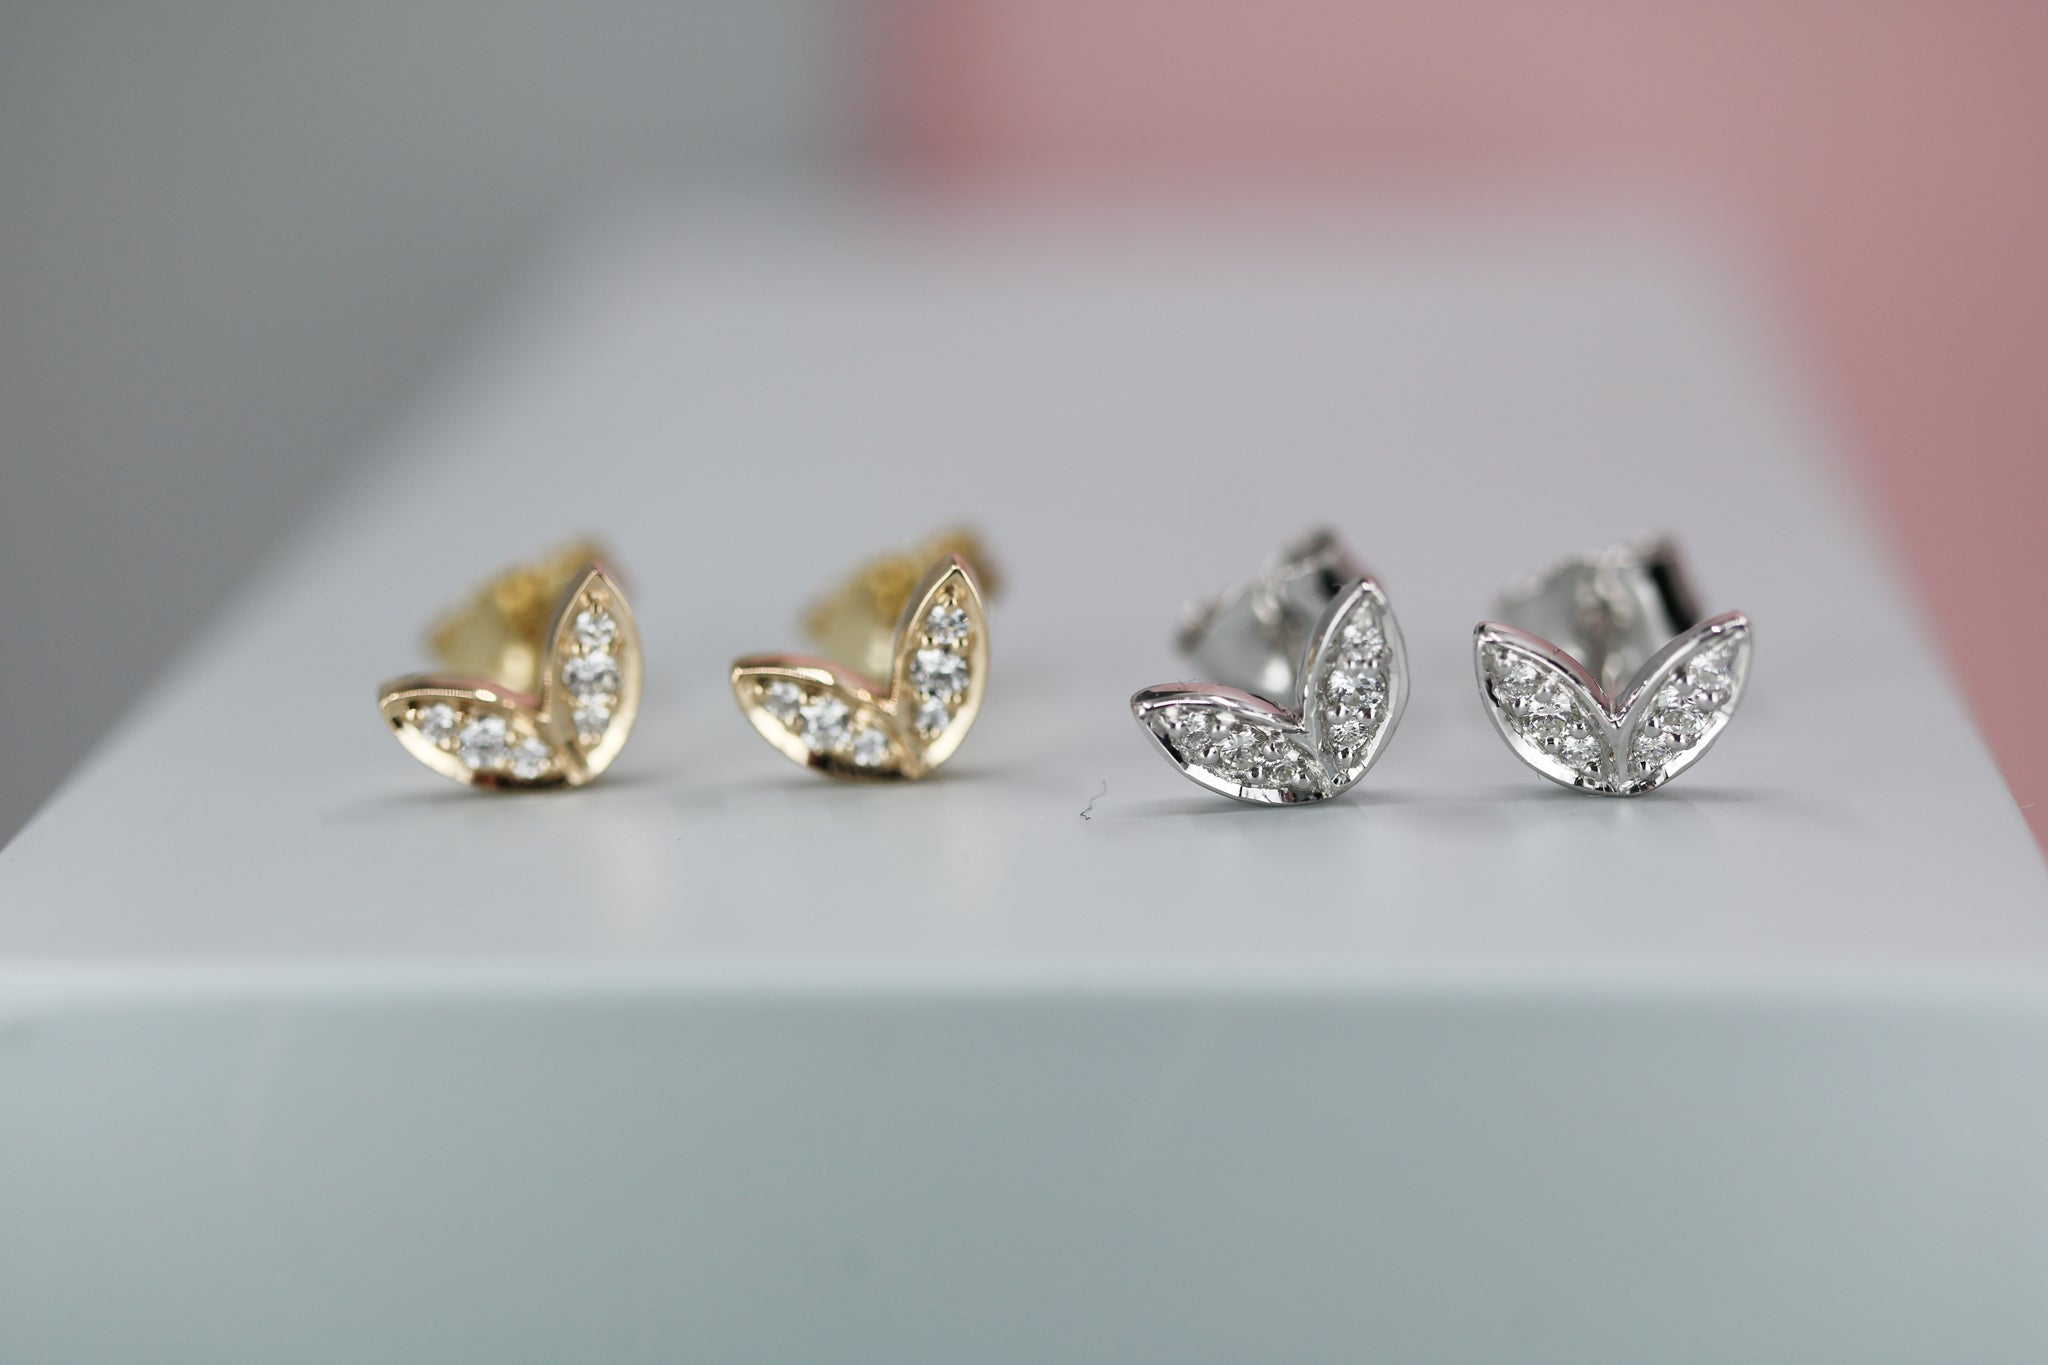 9ct White Gold & Diamond Winged Studs - Hallmark Jewellers Formby & The Jewellers Bench Widnes